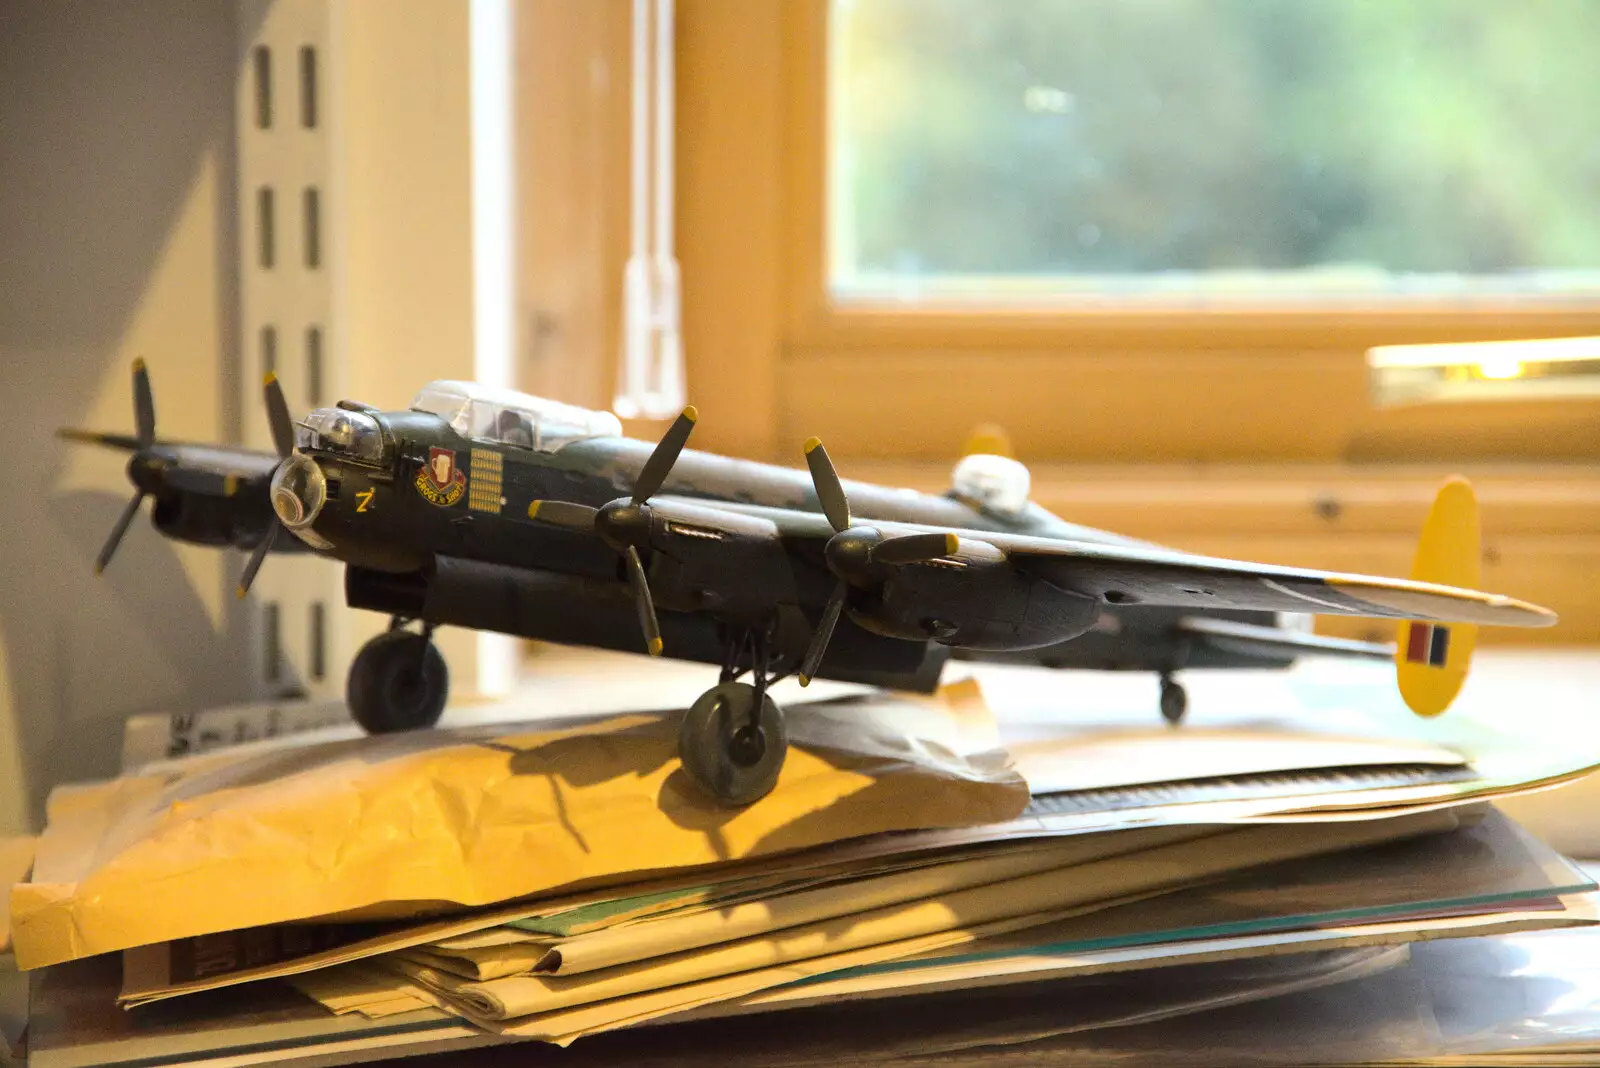 Nosher's Lancaster model is now in the office, from Norwich Lights and a Village Hall Jumble Sale, Brome, Suffolk - 20th November 2021